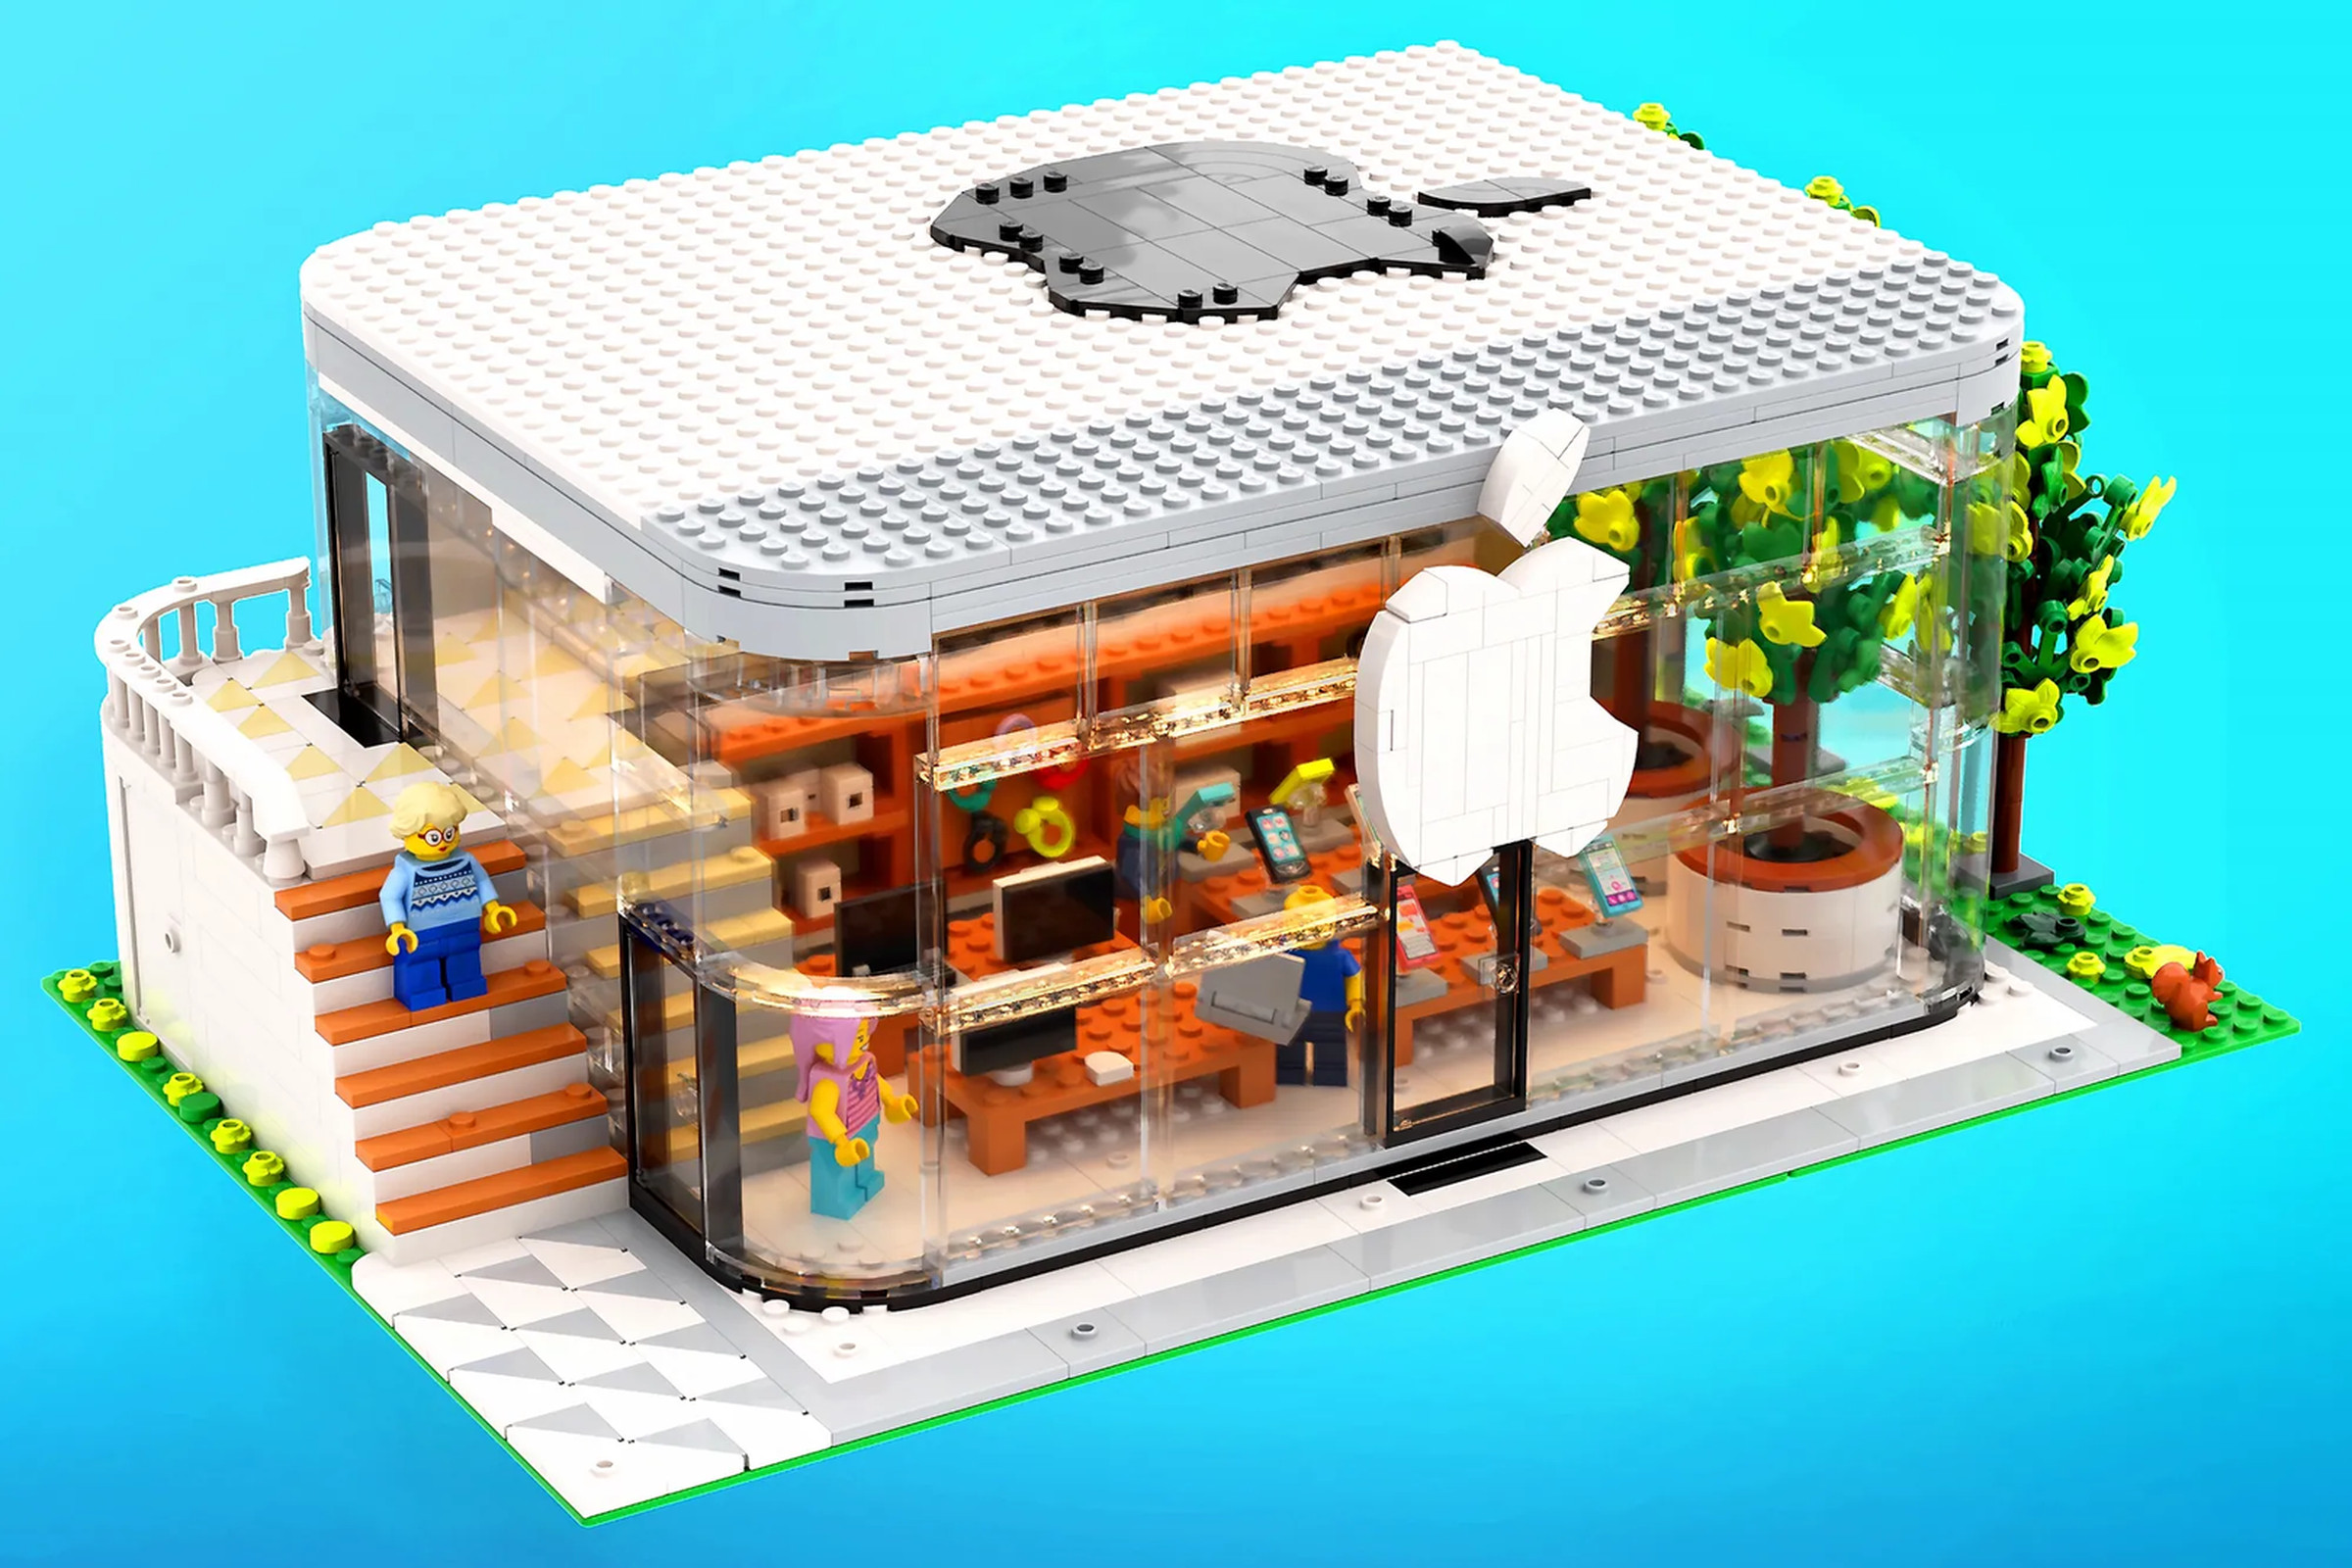 A picture of the Lego Apple Store build in its completed state.